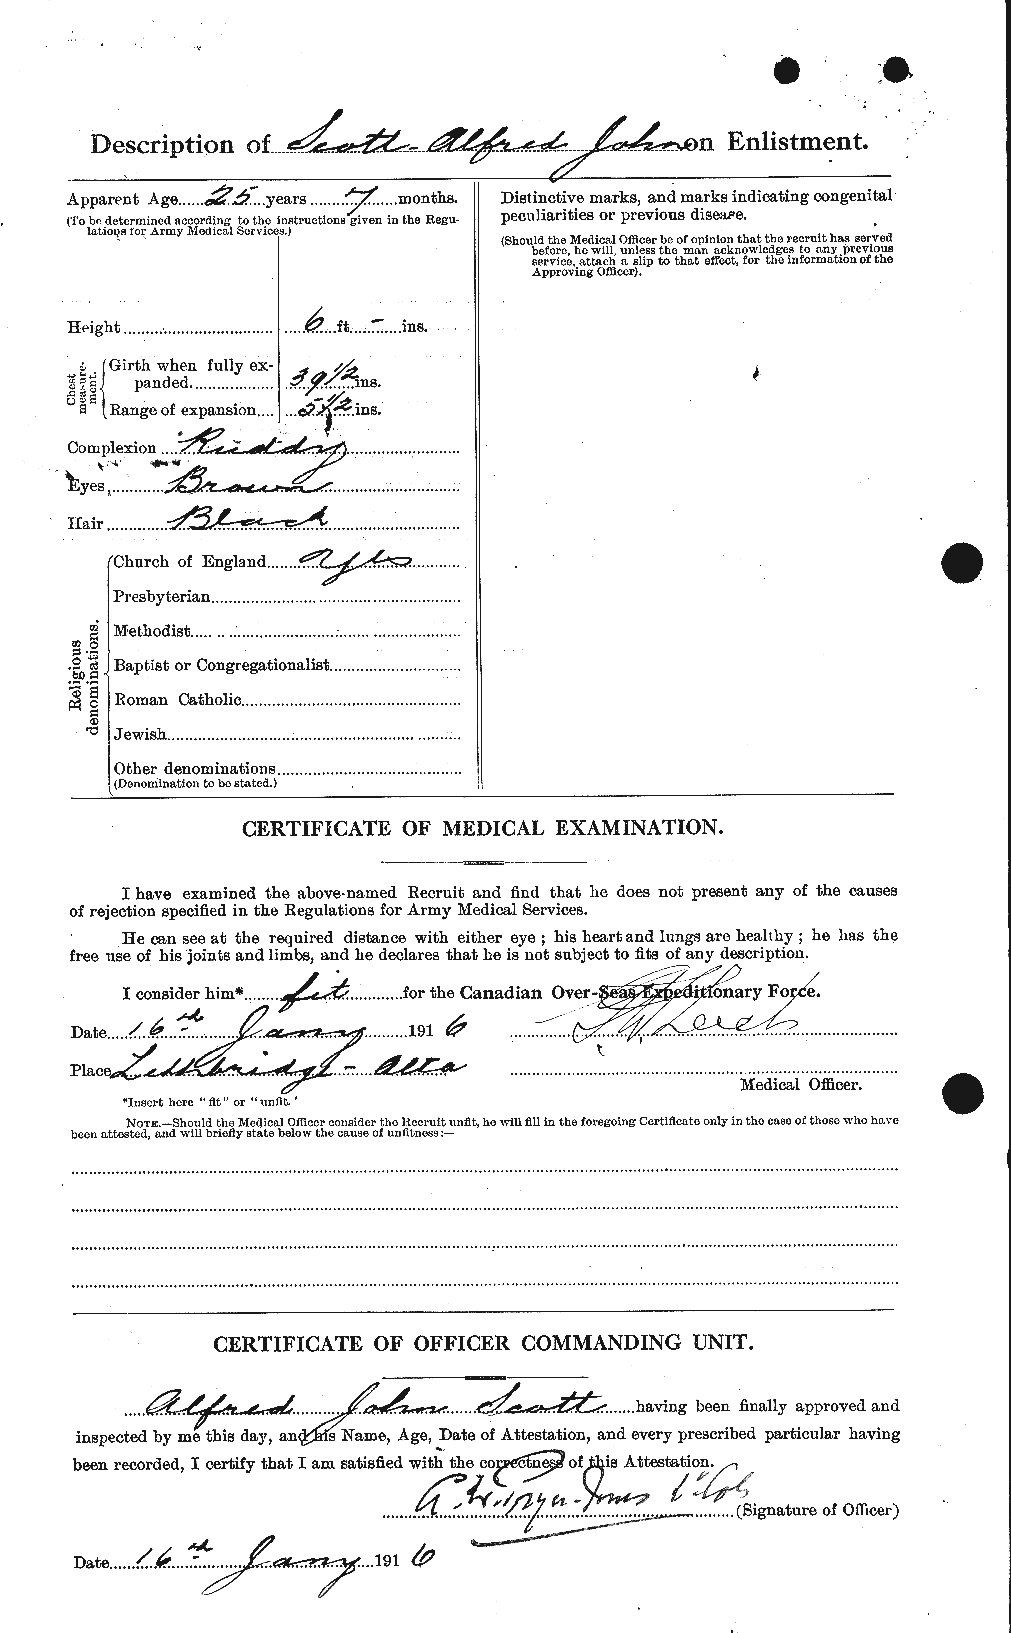 Personnel Records of the First World War - CEF 086580b